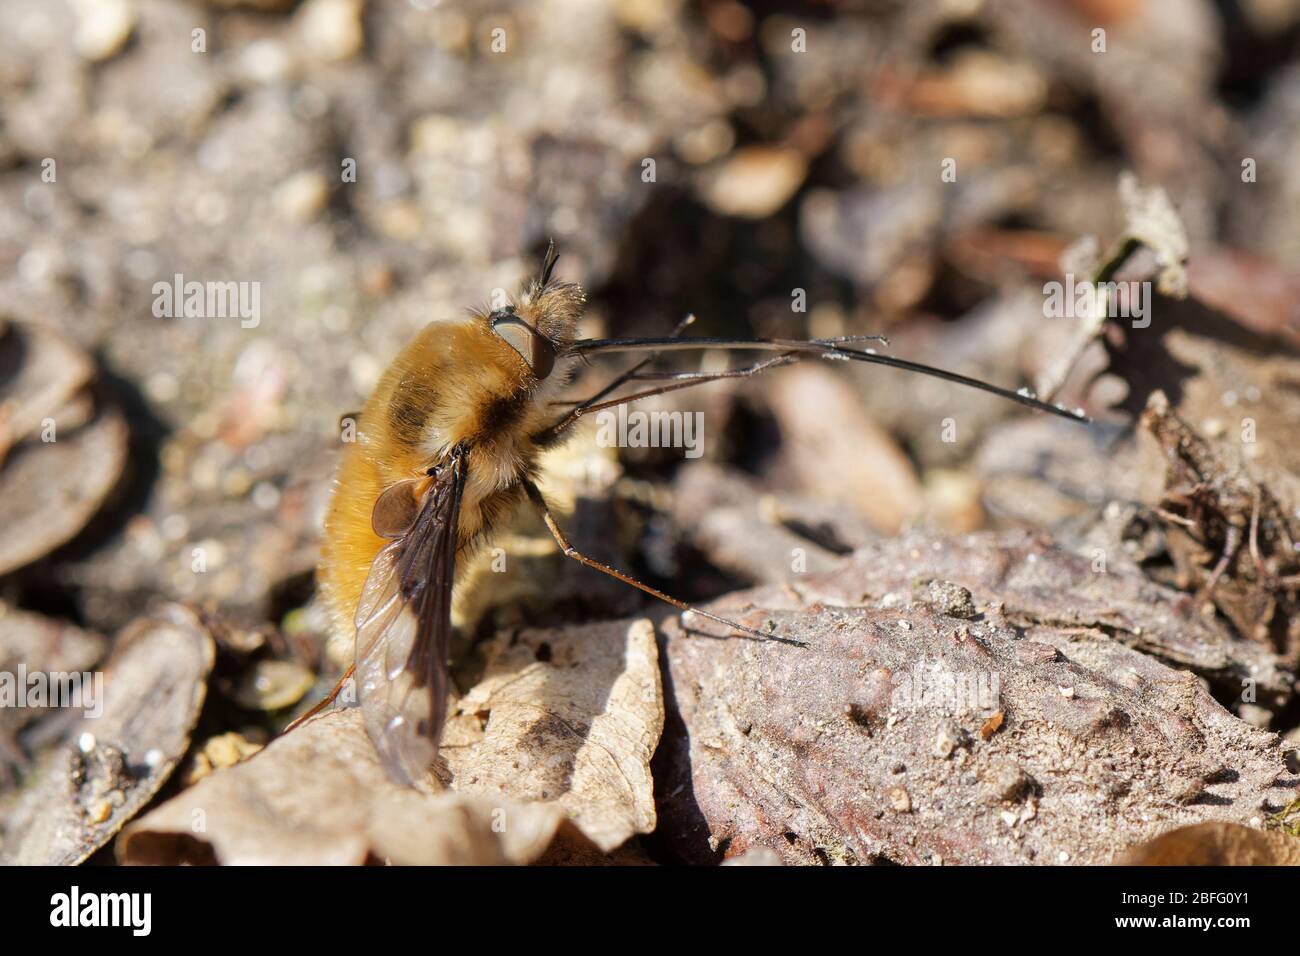 Common bee fly (Bombylius major) extending and cleaning its long proboscis as it rests on leaf litter, Wiltshire garden, UK, March. Stock Photo